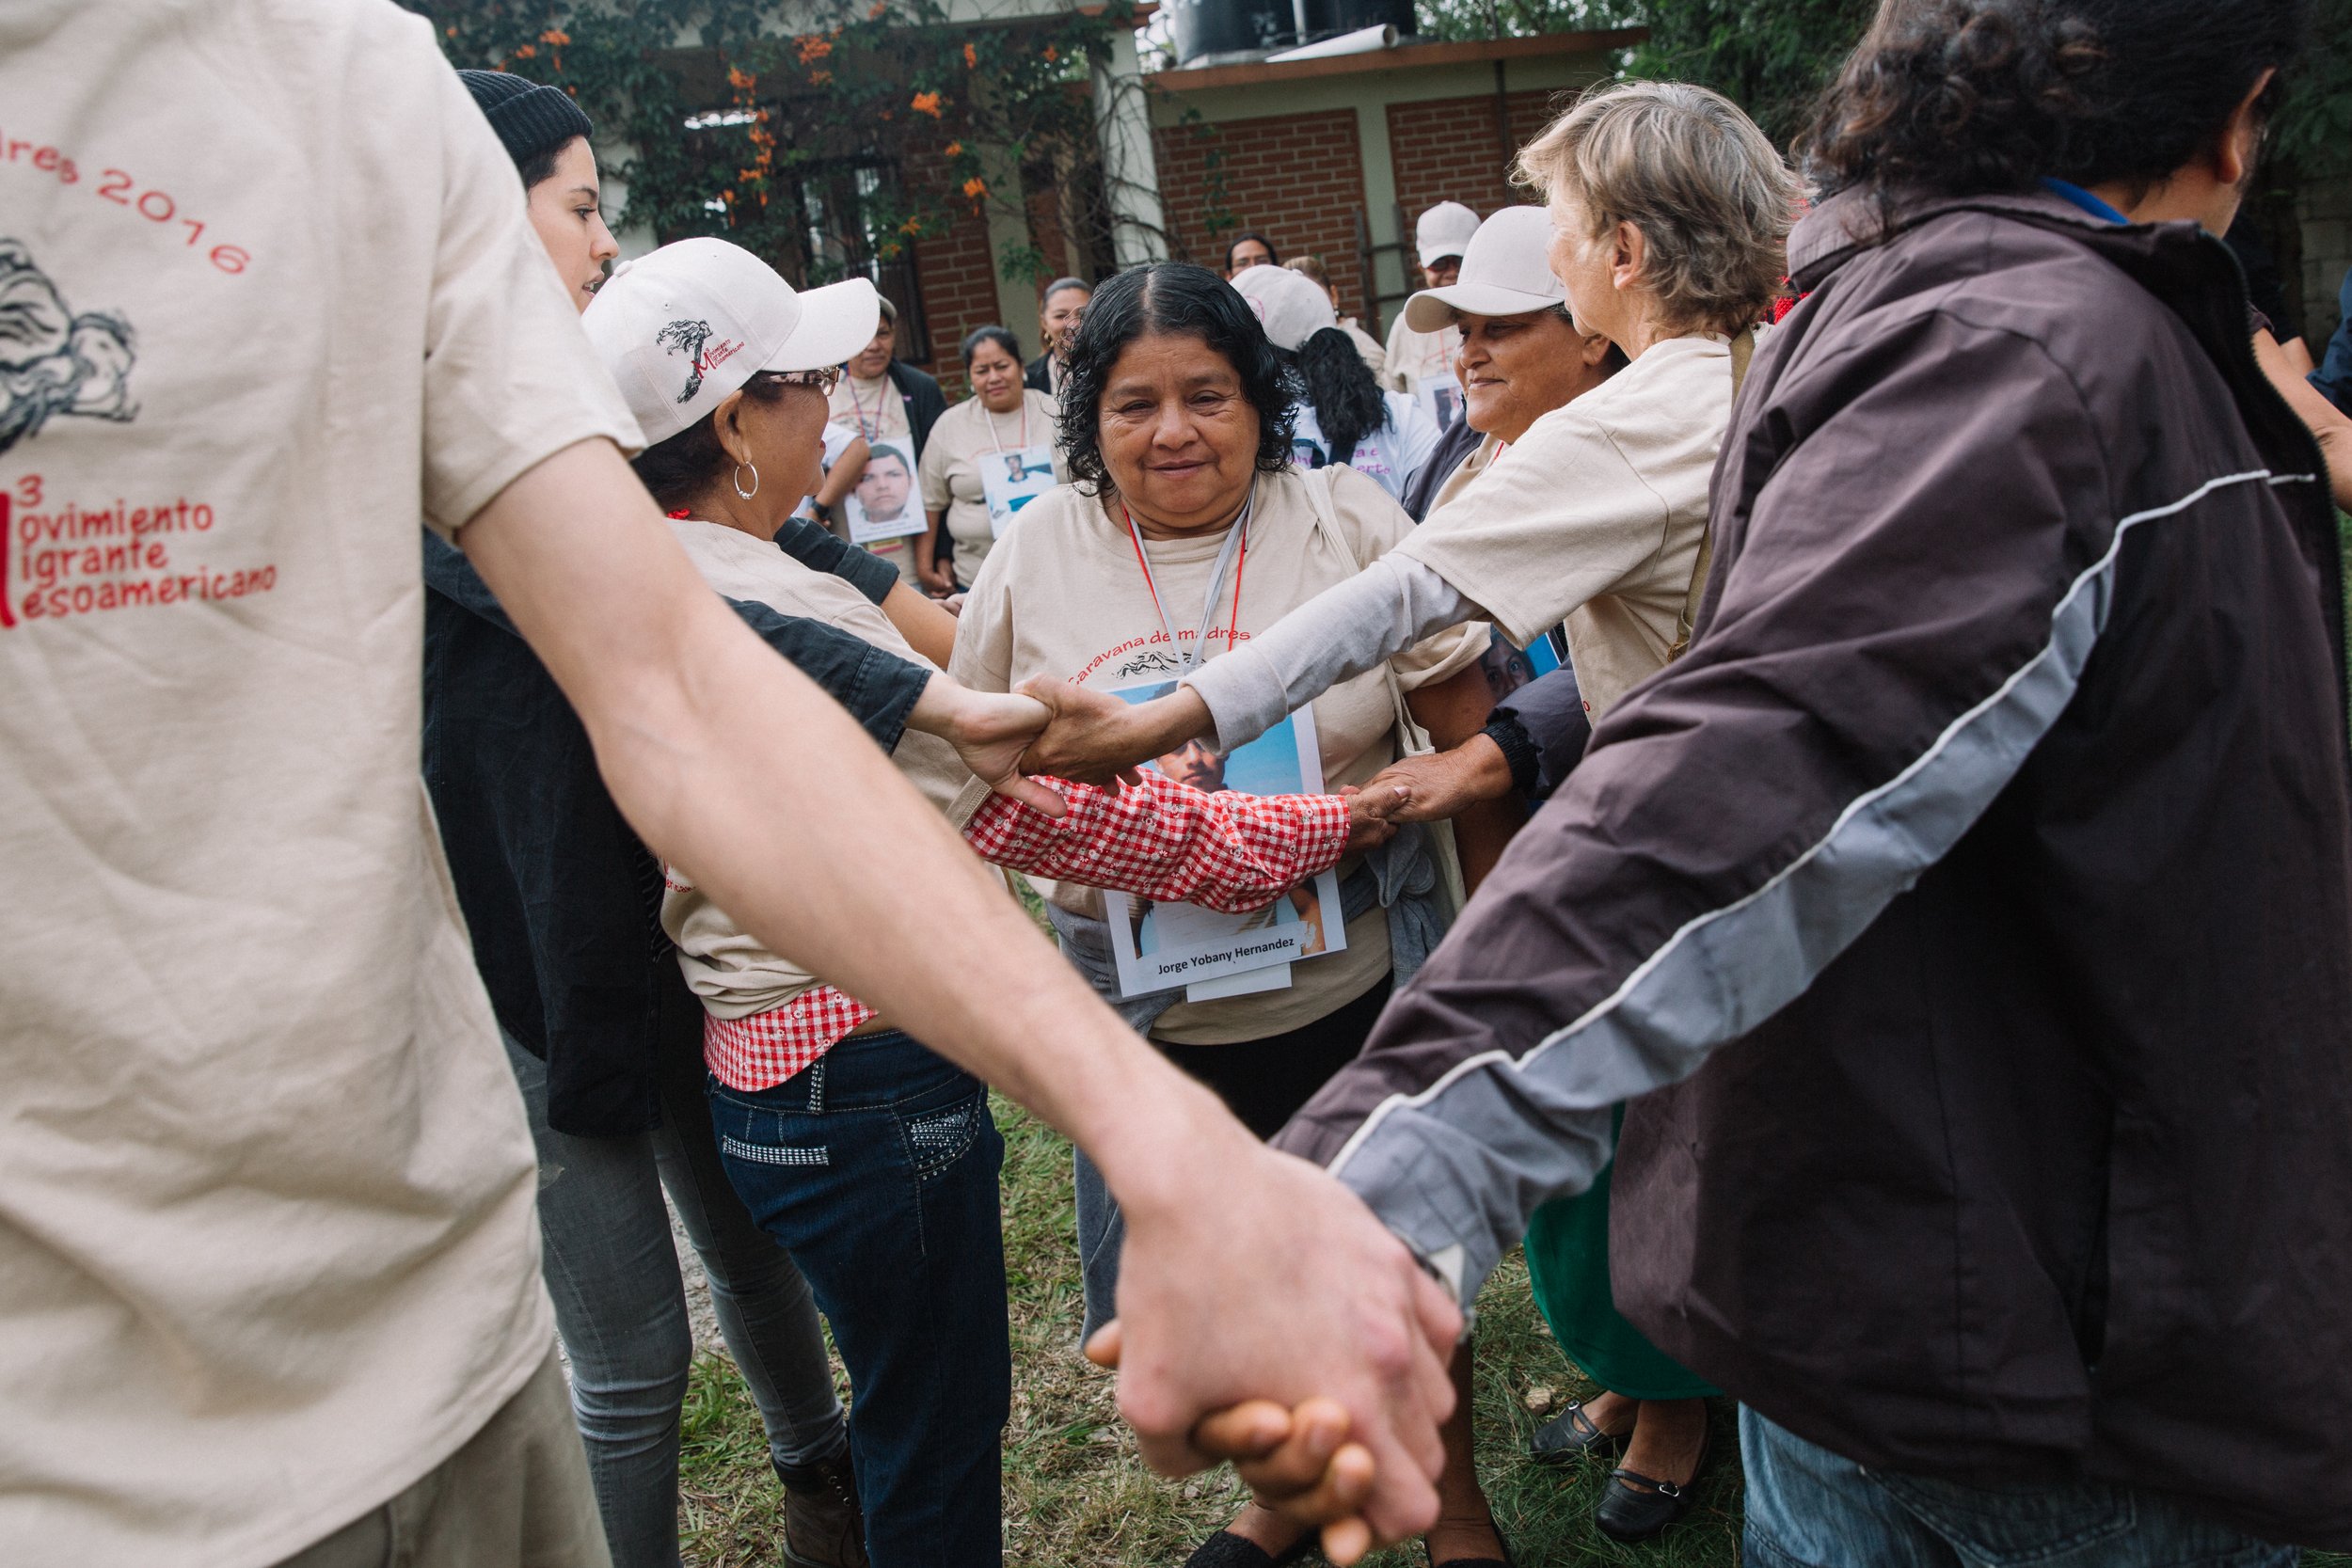  In a beautiful display of unity and positivity, the members of the caravan in Comitan, Chiapas, Mexico, linked arms and performed a final farewell exercise. The exercise aimed to release tension and negativity while inviting positive energy and laug